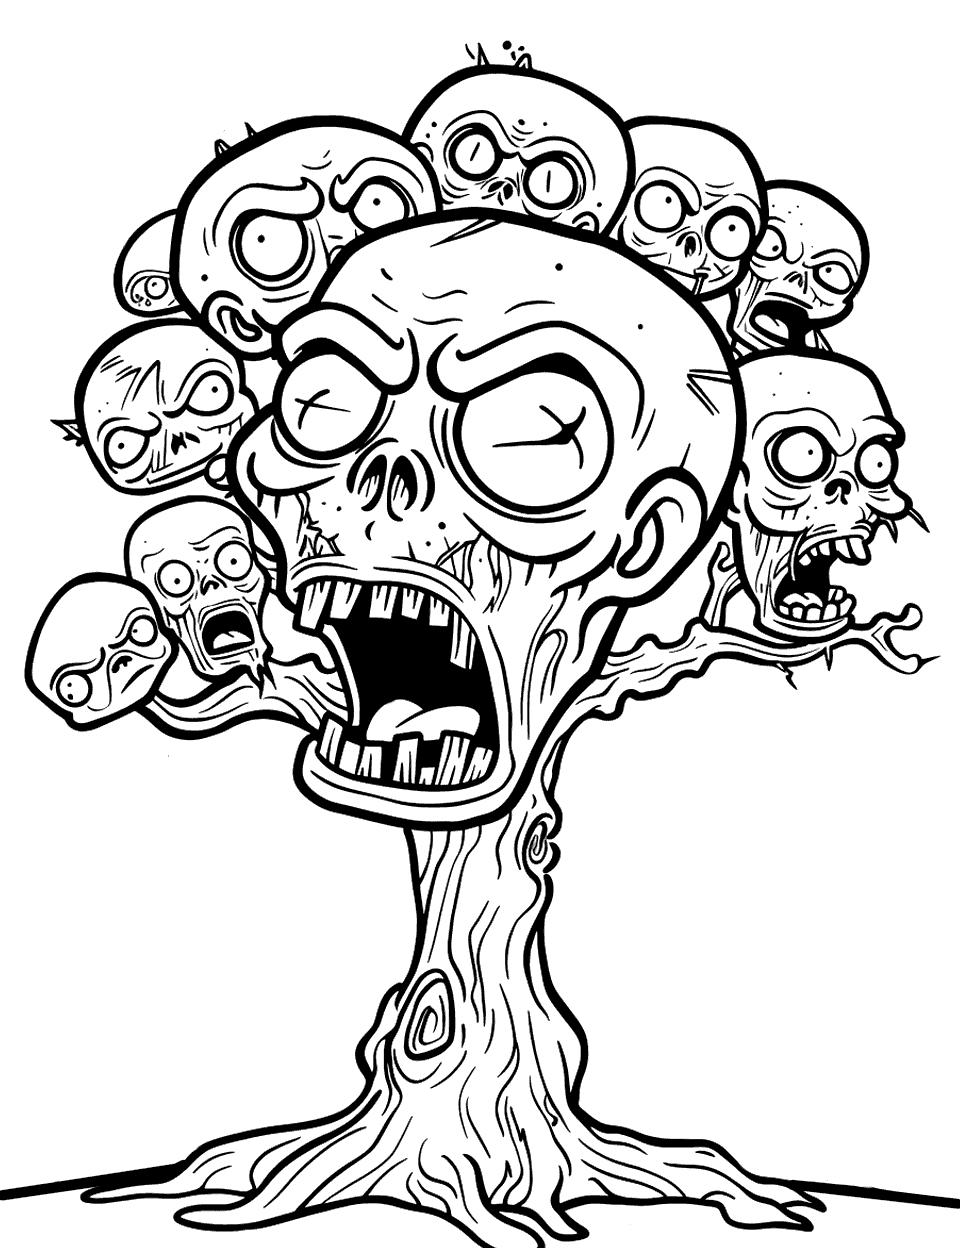 Zombie Tree Coloring Page - A creepy tree with faces of zombies emerging from all over it.